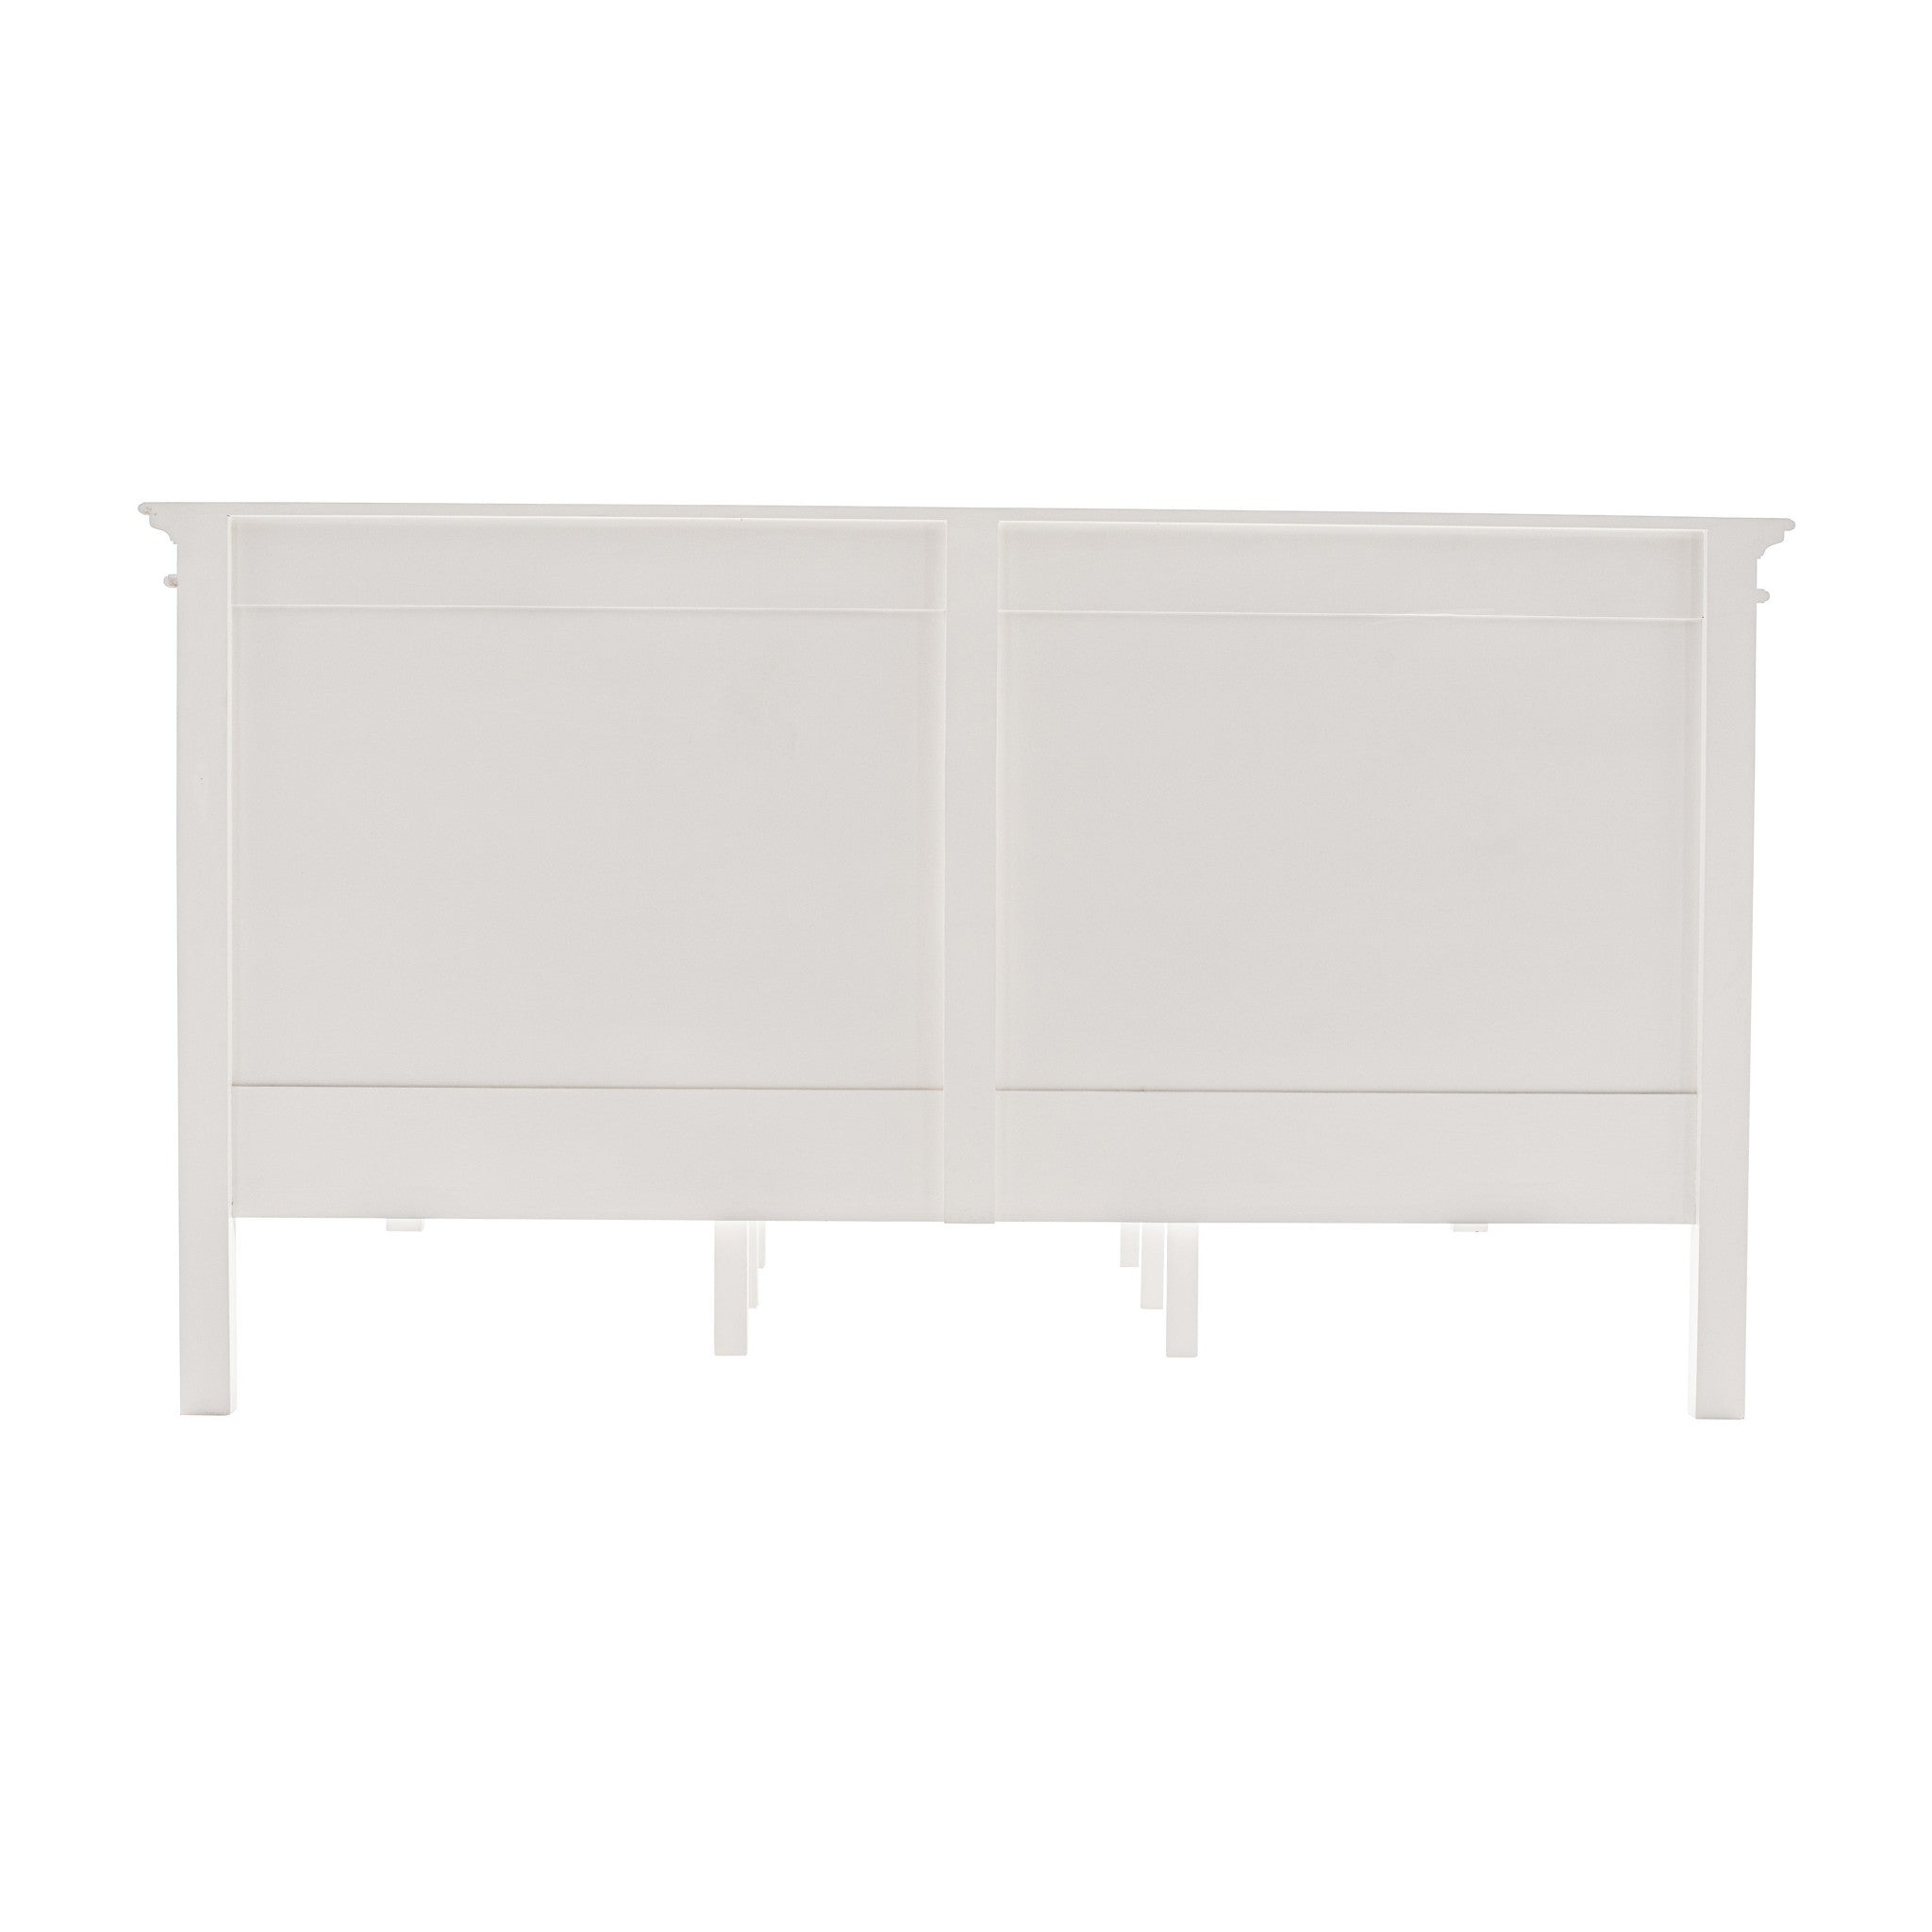 Classic White Panel King Size Bed